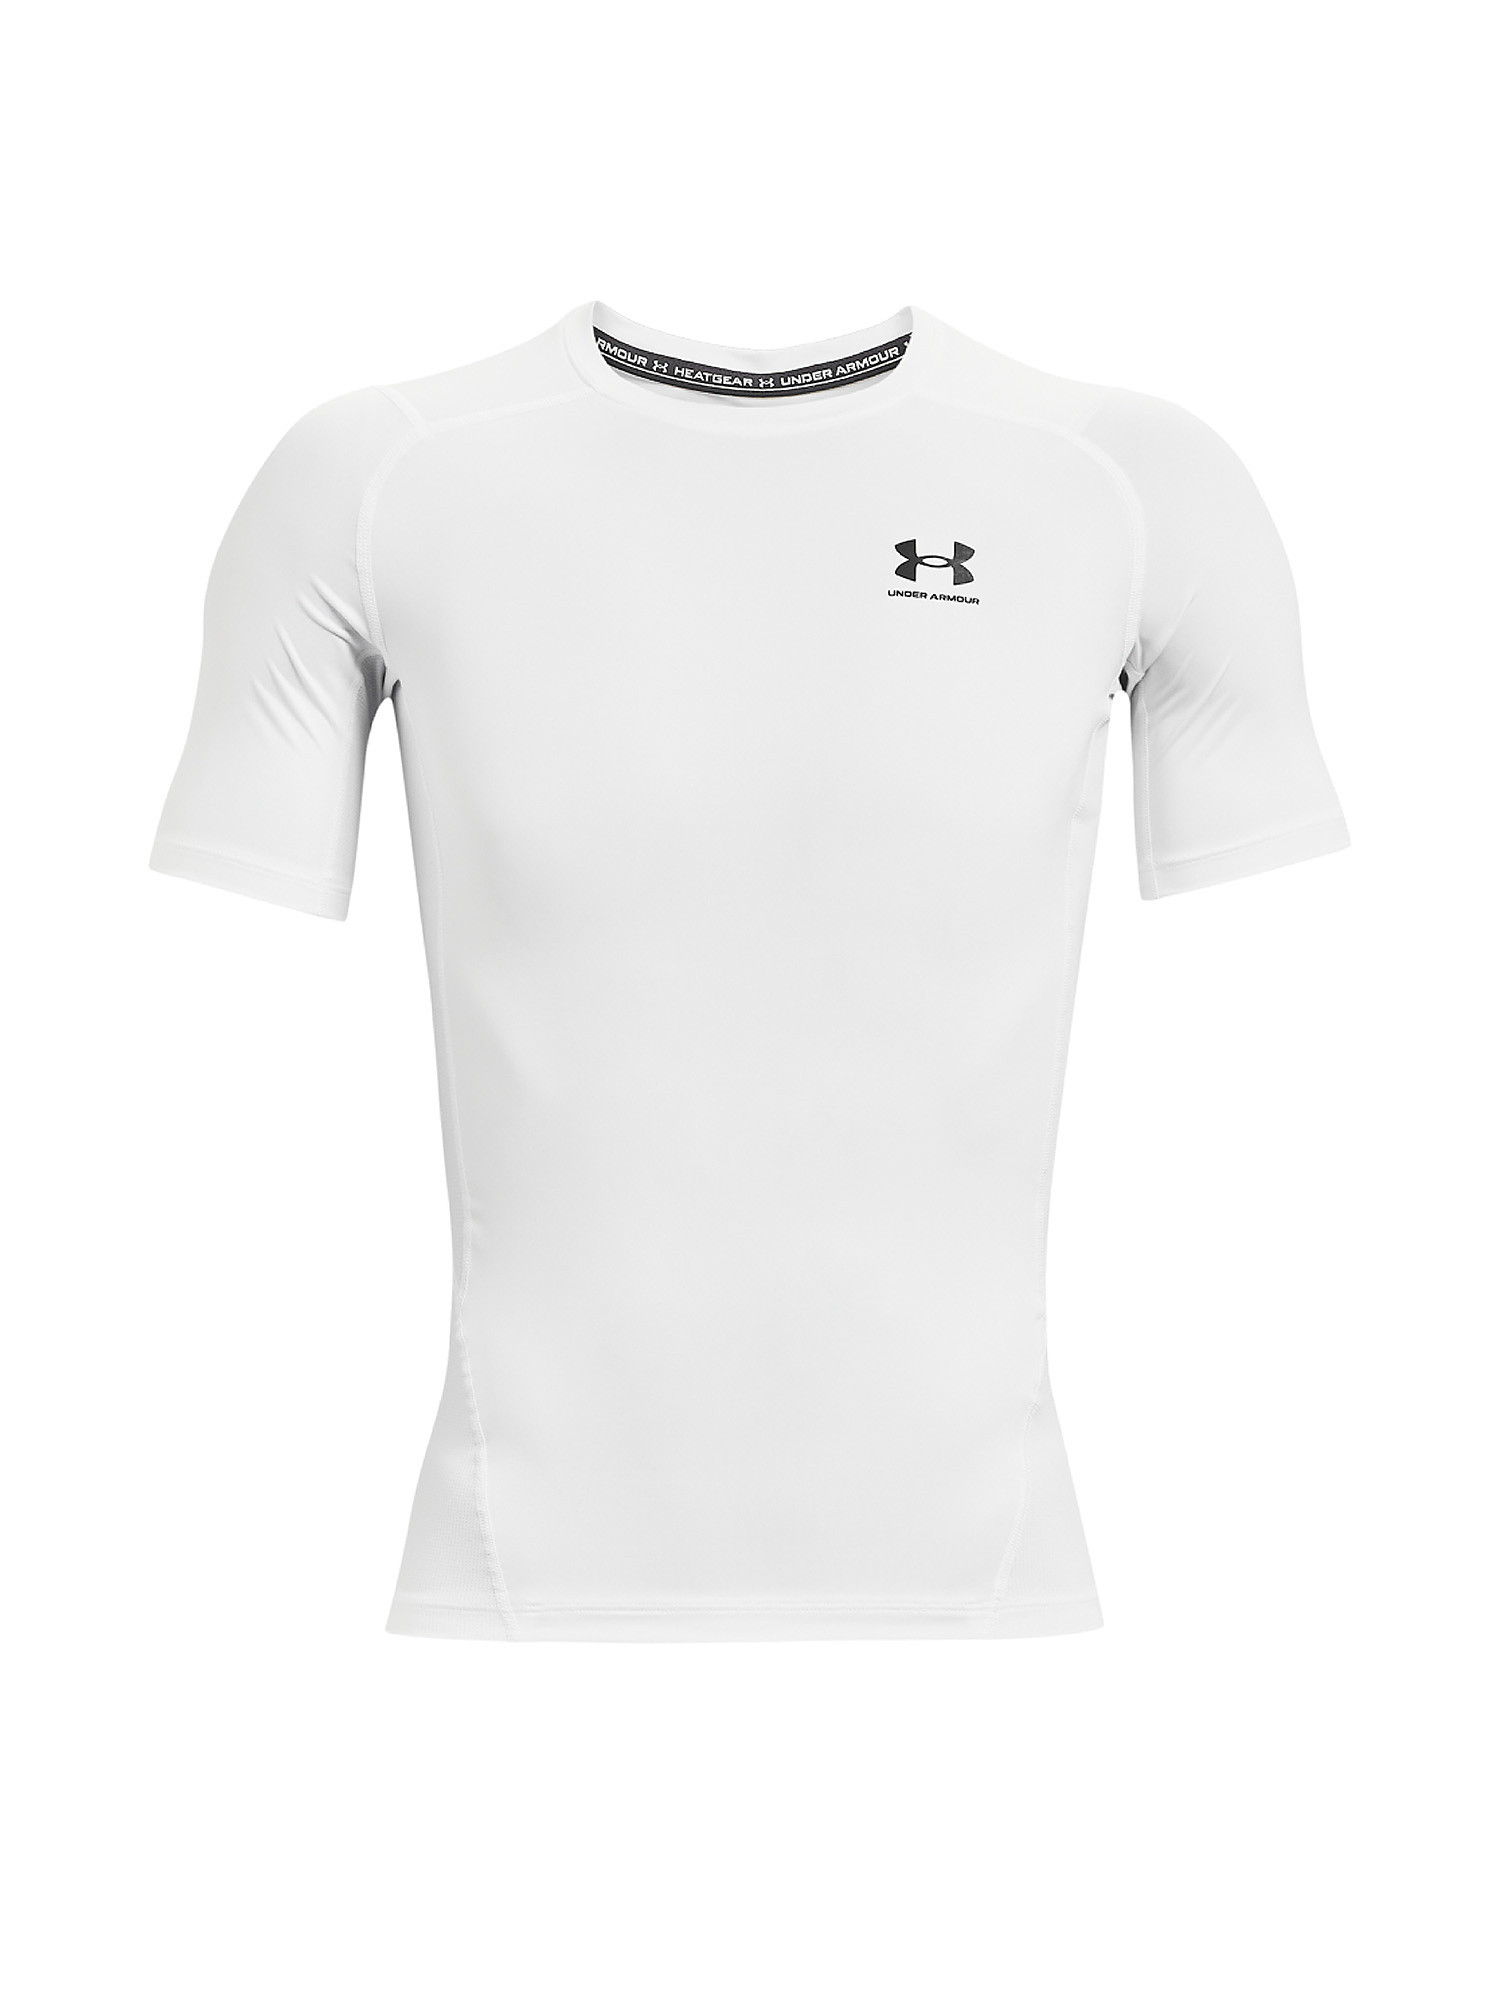 Under Armour - HeatGear® Armor Short Sleeve Jersey, White, large image number 0